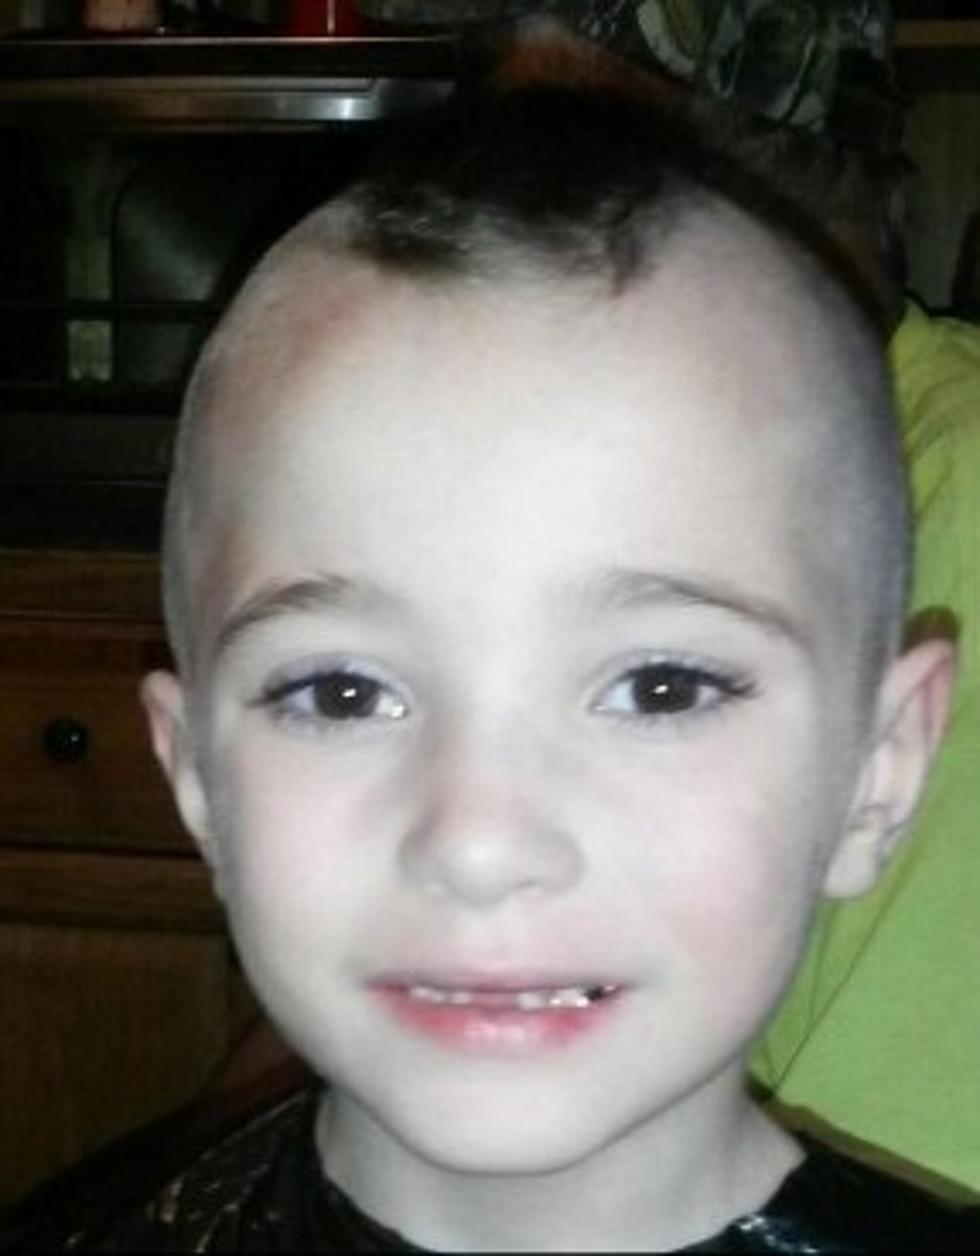 5-Year-Old Boy Abducted Activates Amber Alert